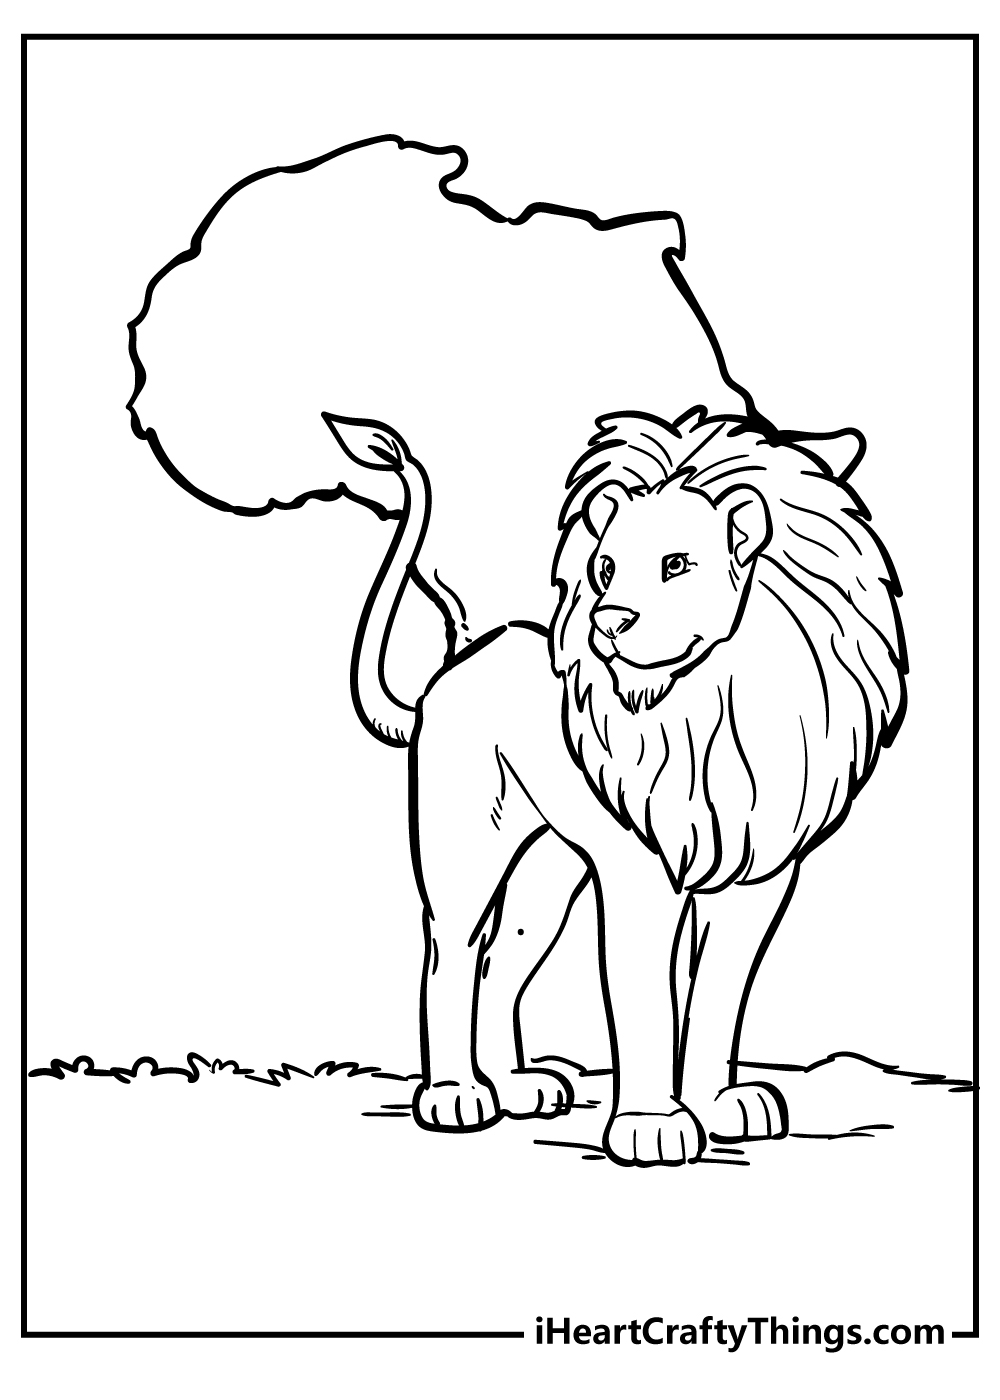 Printable Africa Coloring Pages Updated 20